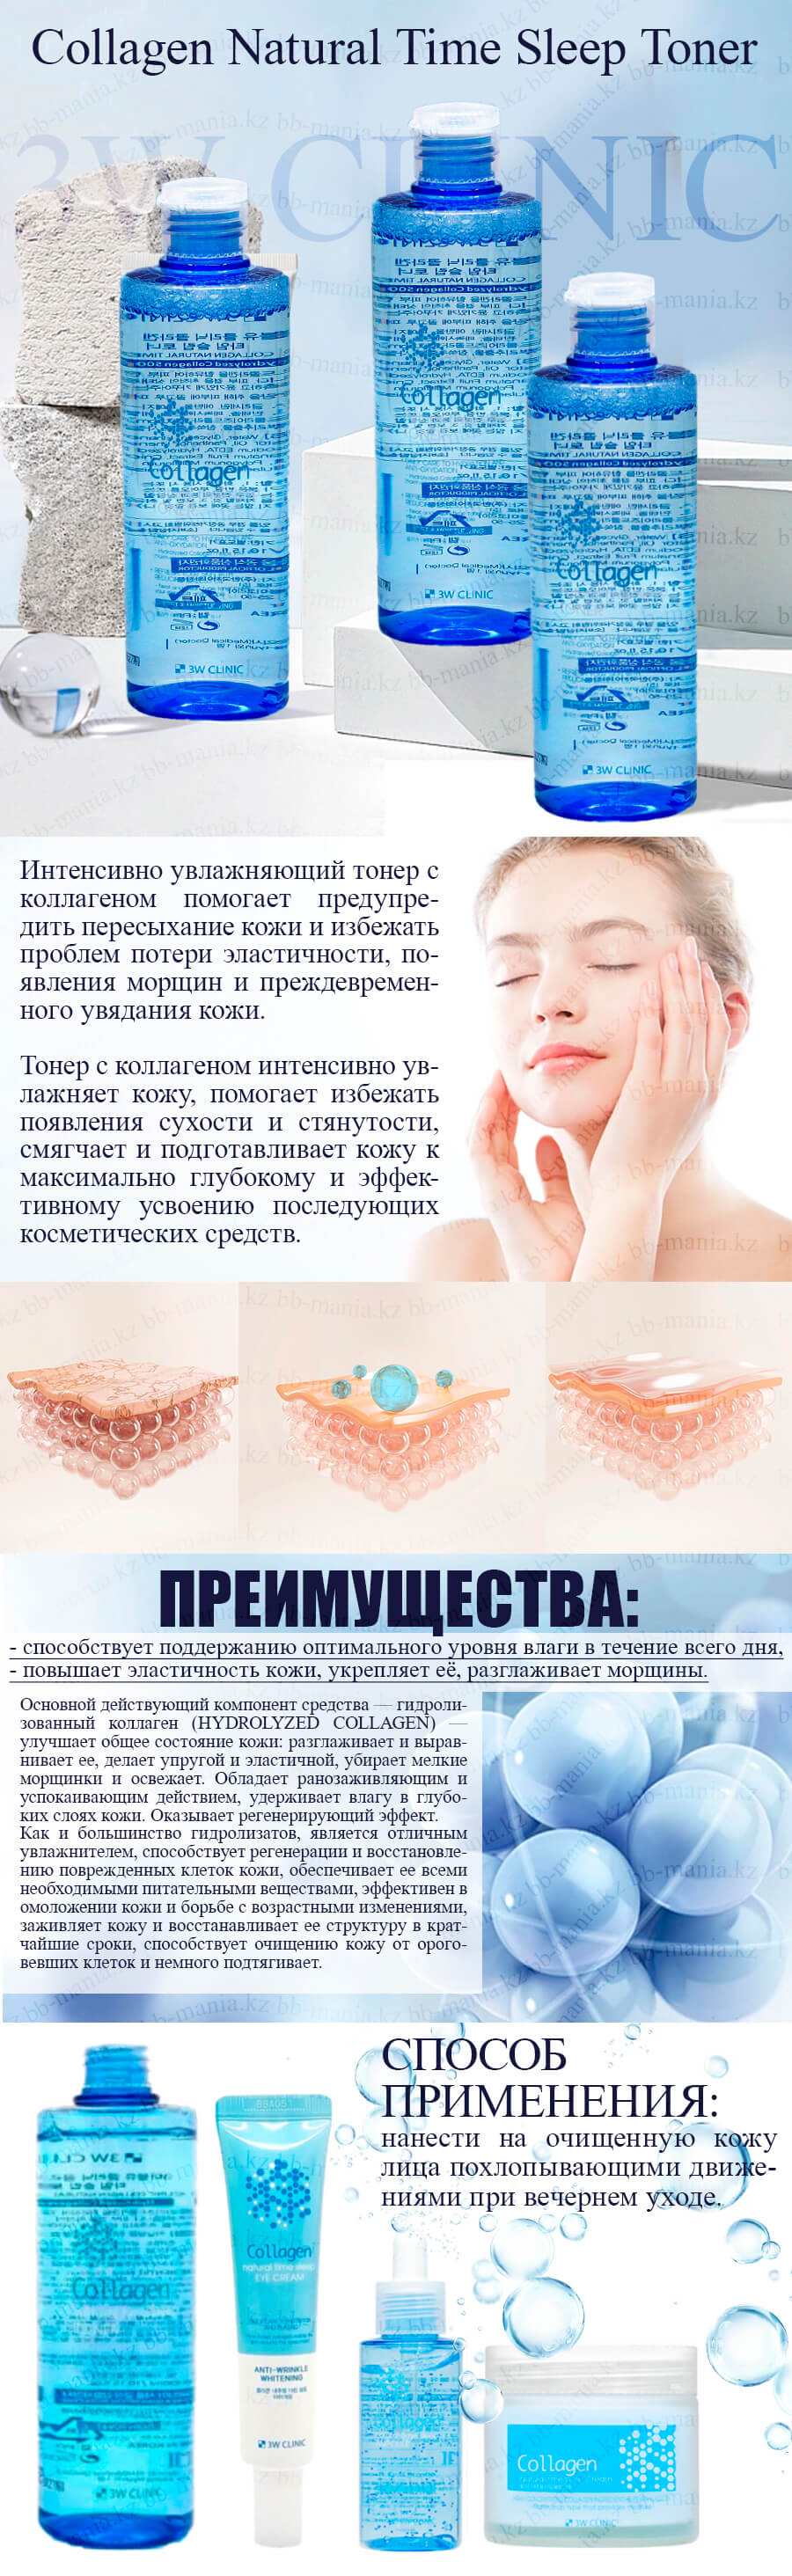 collagen_natural_time_sleep_toner_3w_clinic